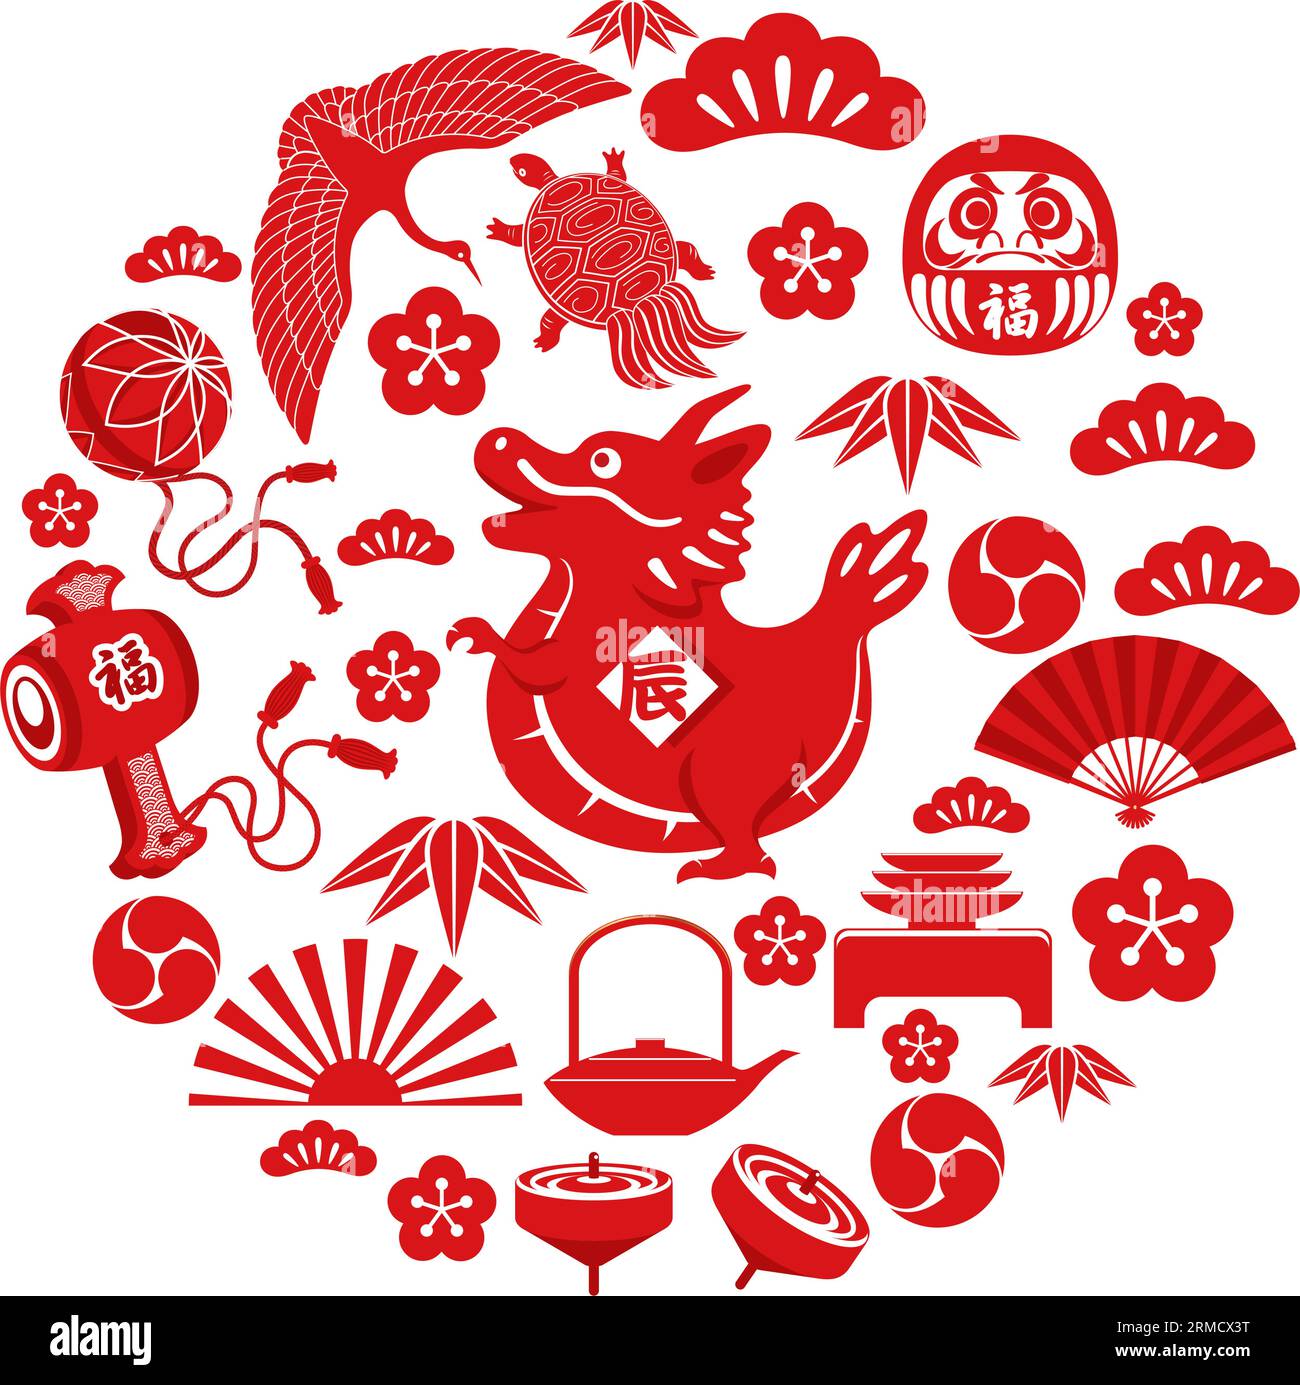 The Year Of The Dragon Icon And Other Japanese Vintage Lucky Charms Celebrating The New Year. Vector Illustration Isolated On A White Background. Stock Vector